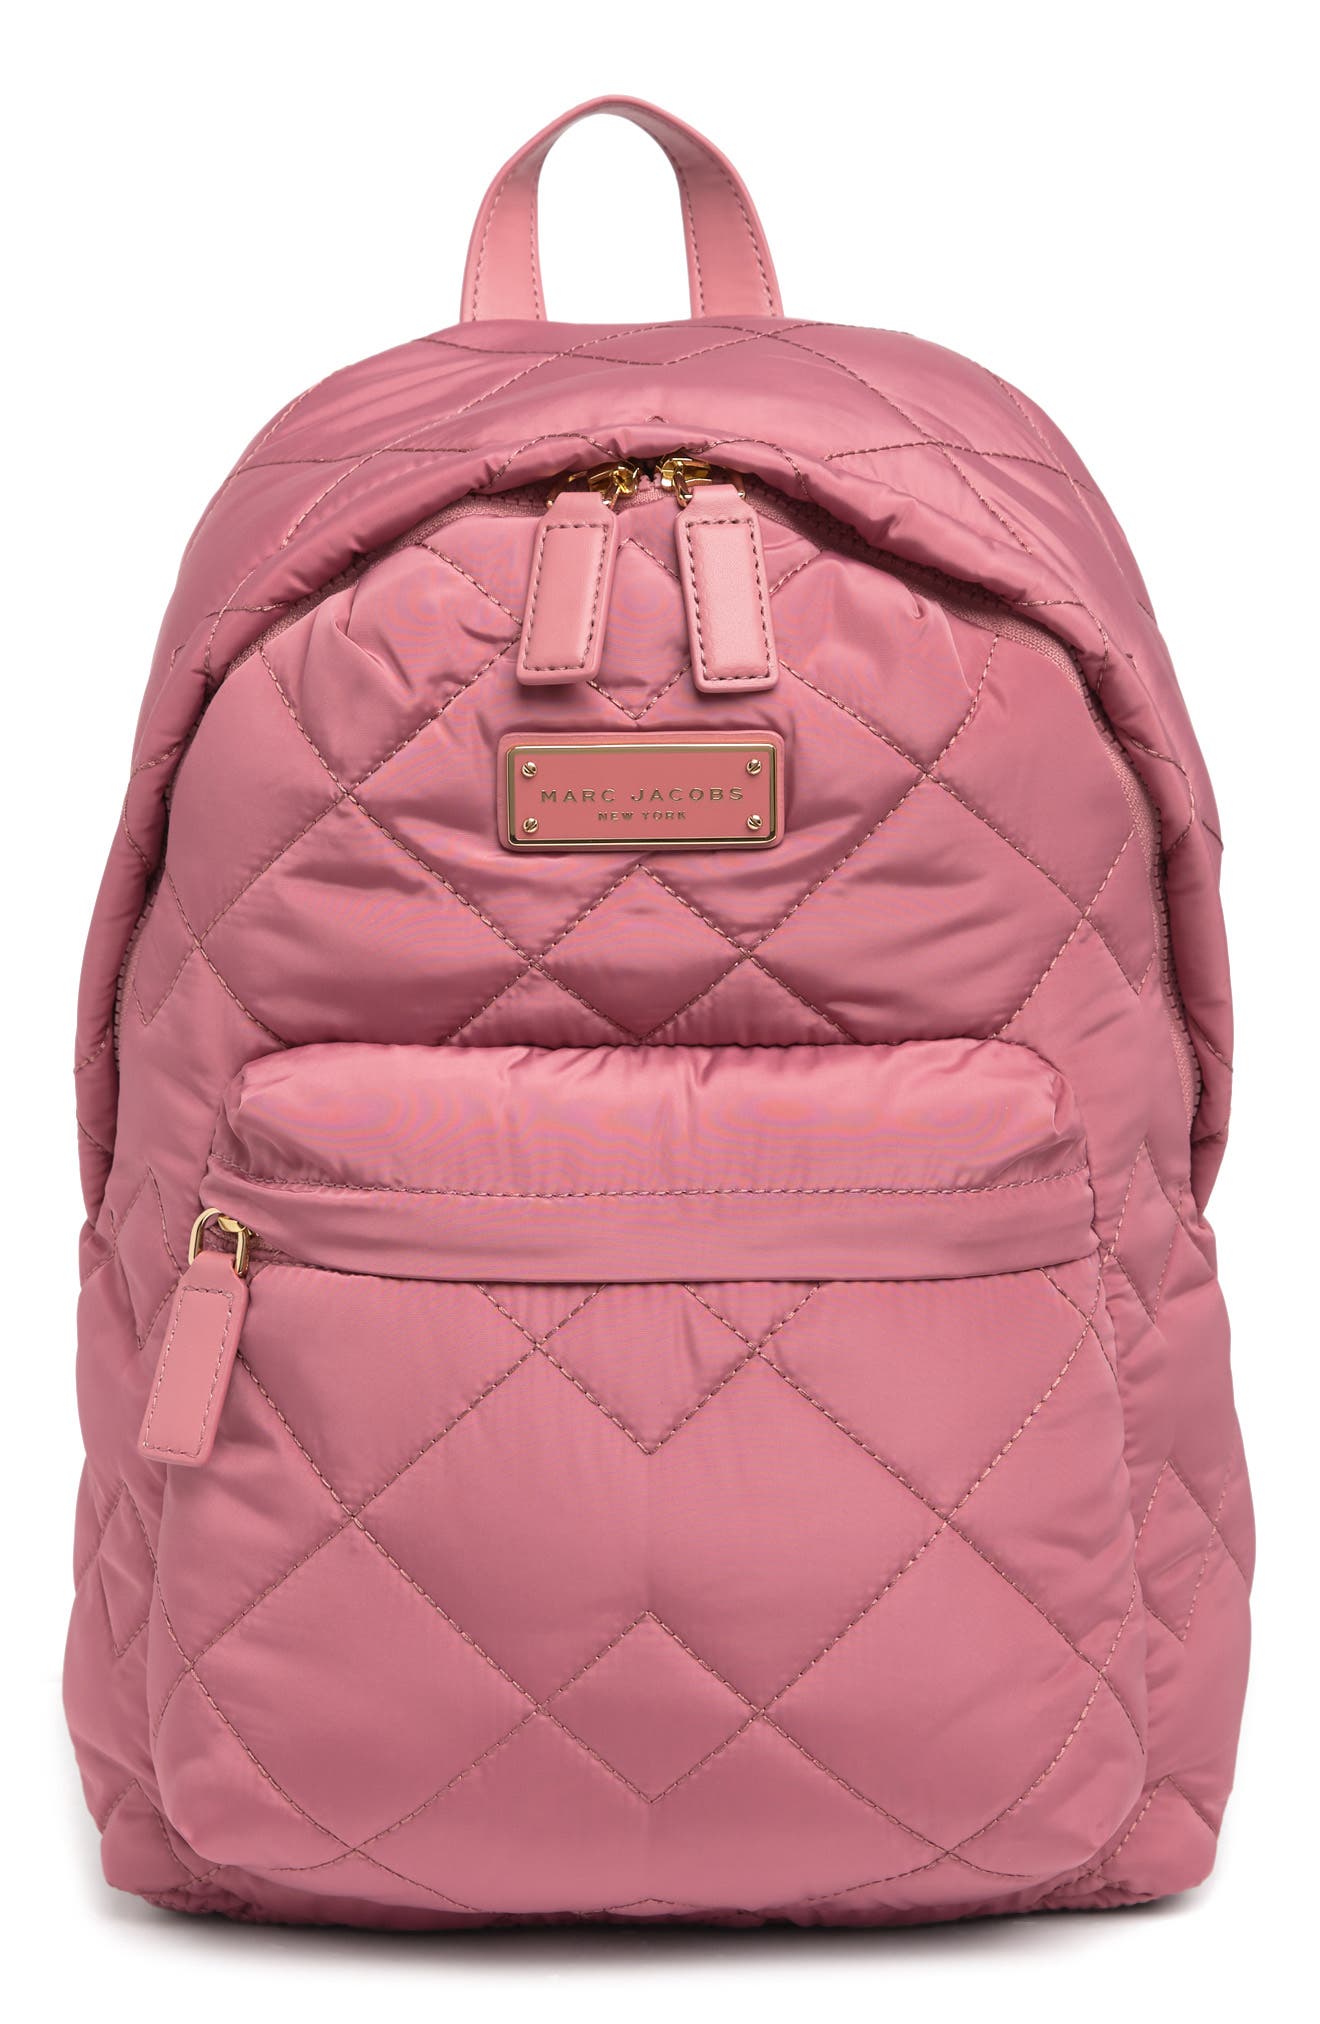 Nautica West End Womens Small Designer Backpack